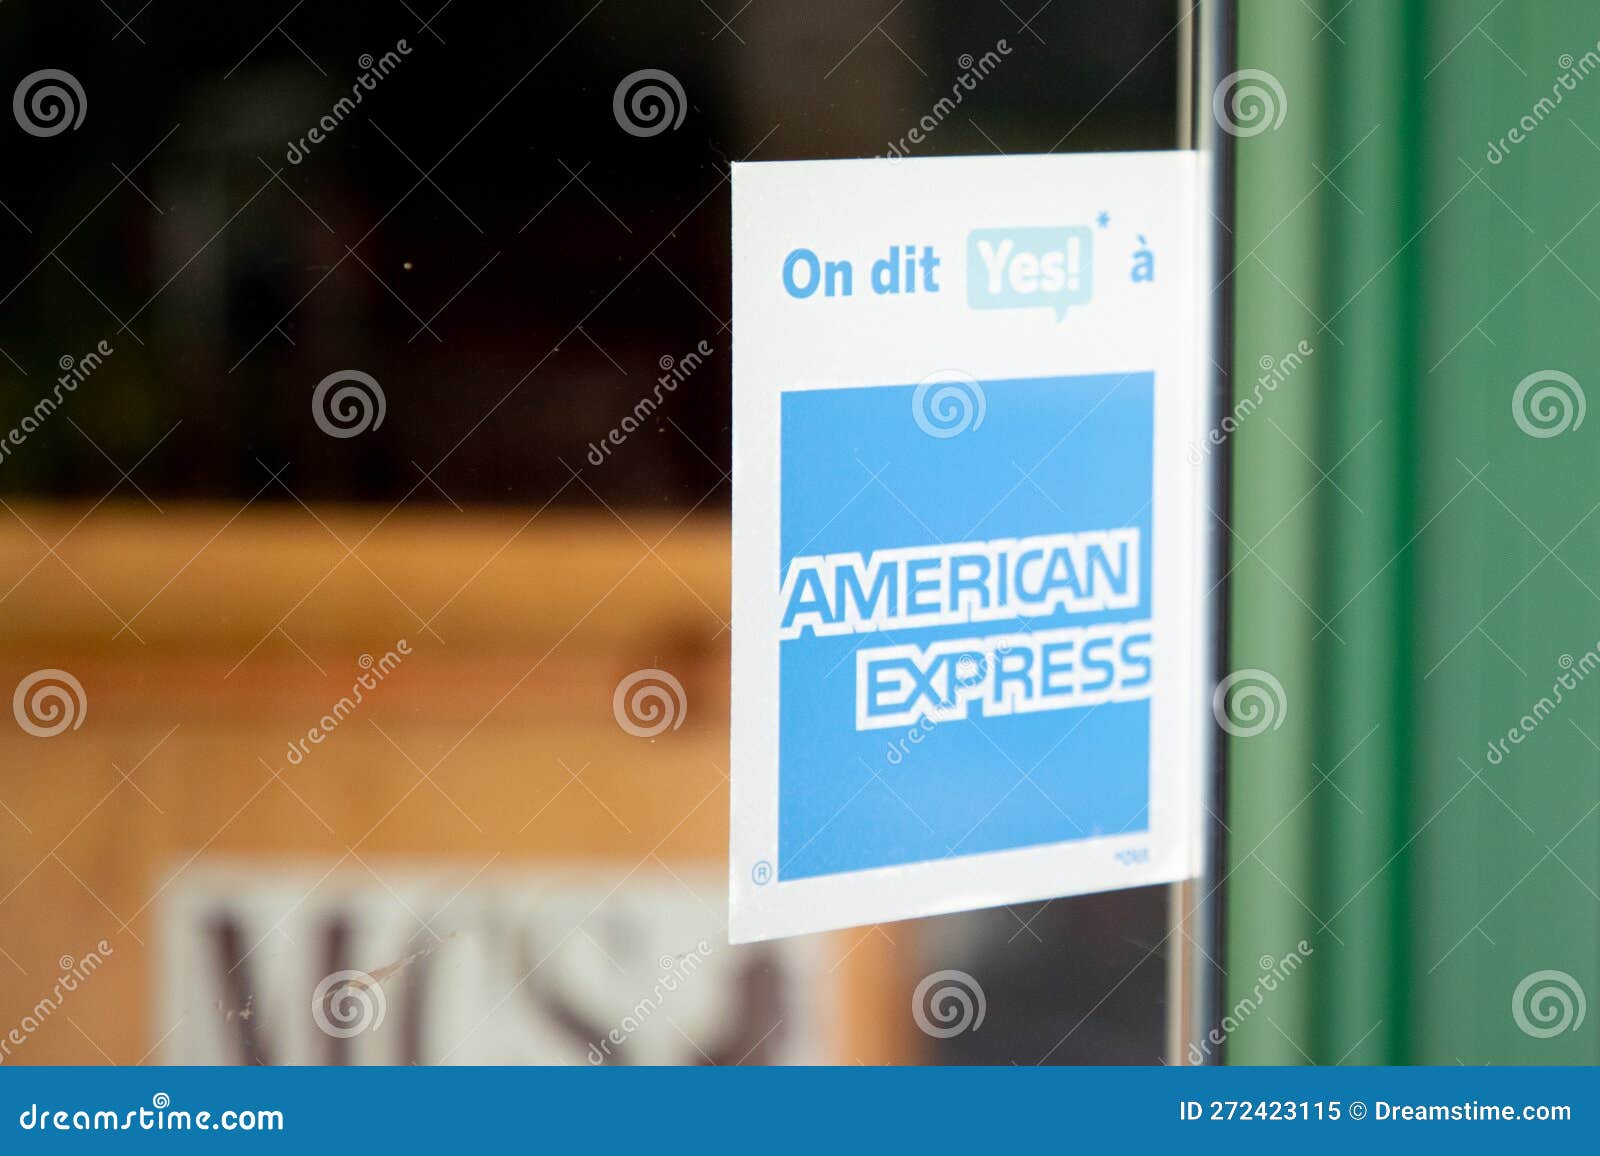 Amex American Express Logo Brand and Text Sign on Entrance Windows